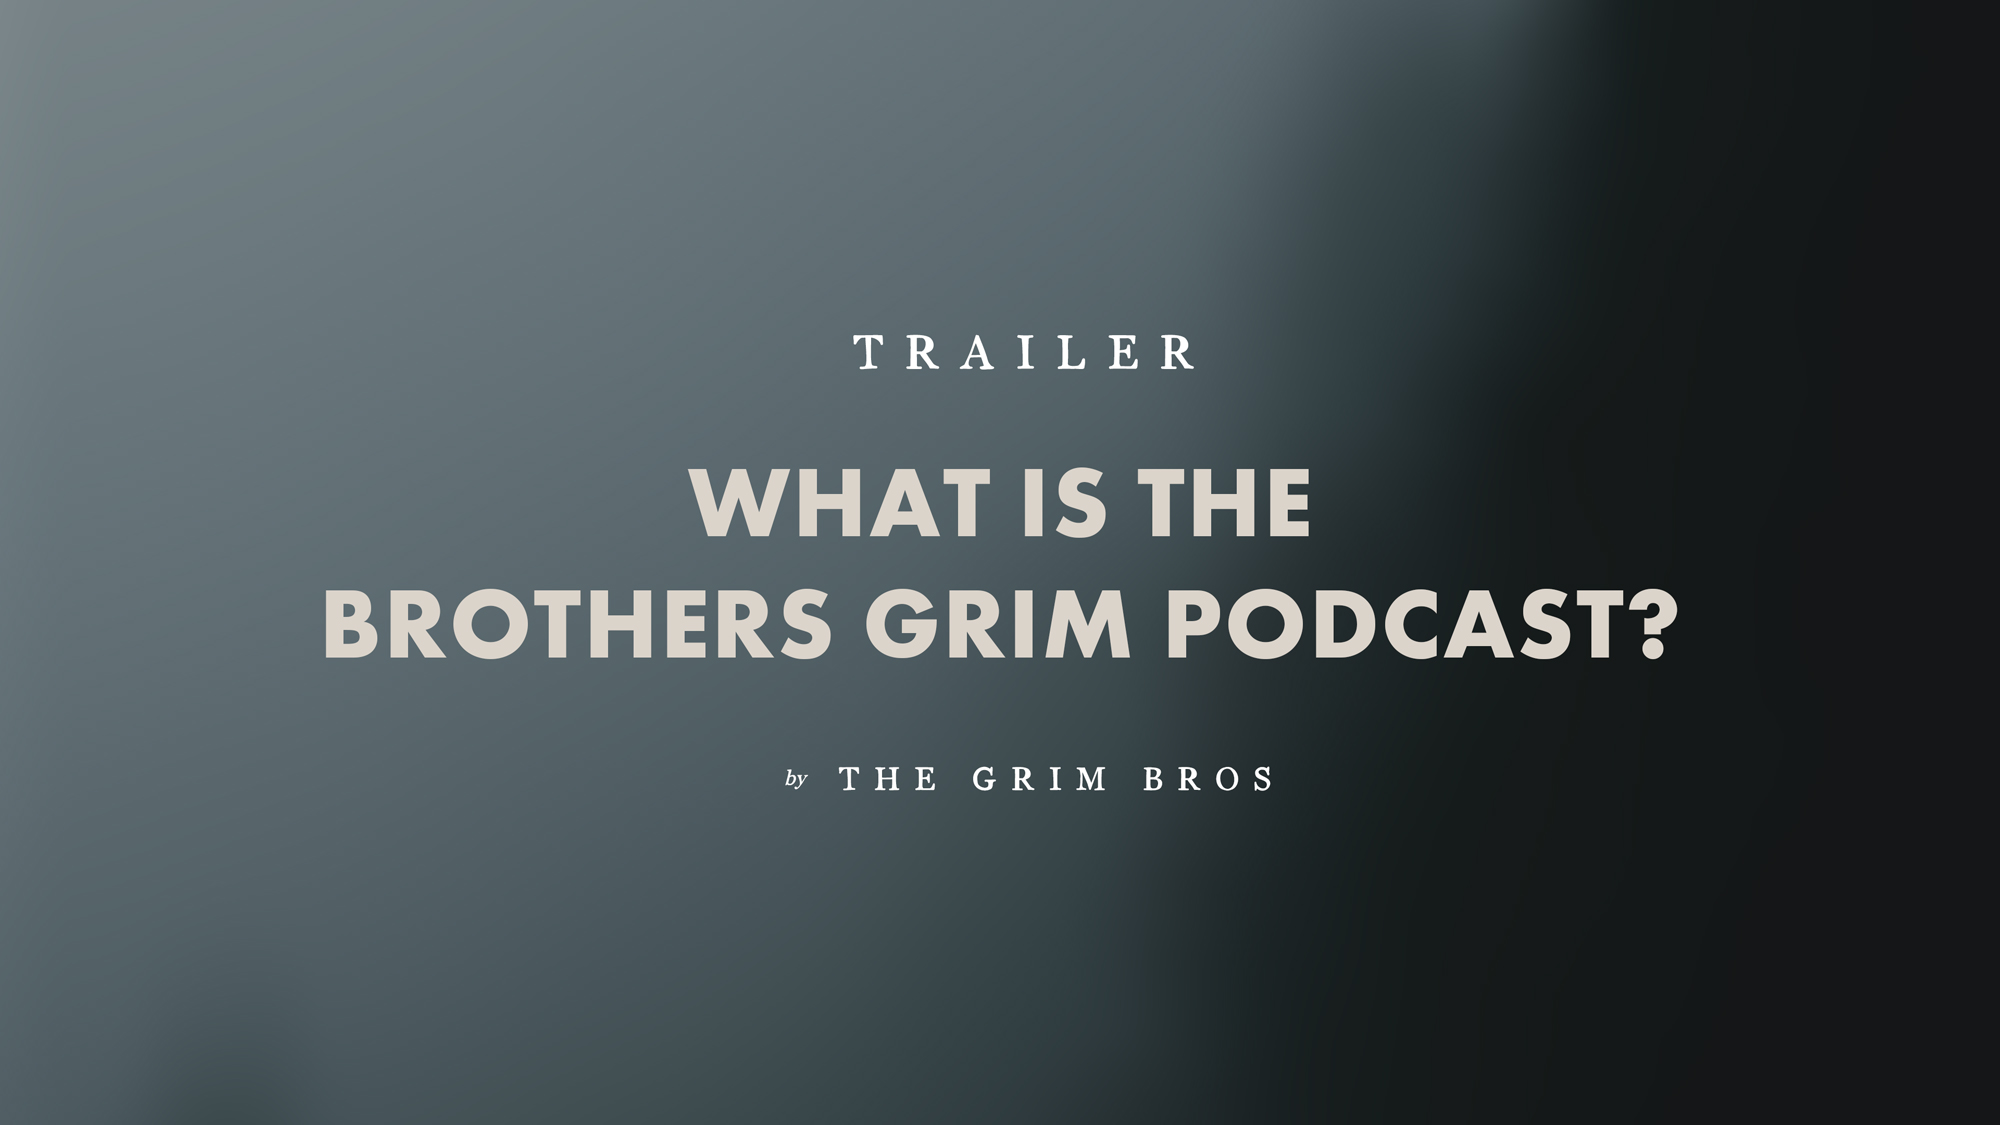 The Brothers Grim Podcast - Season 1 Trailer